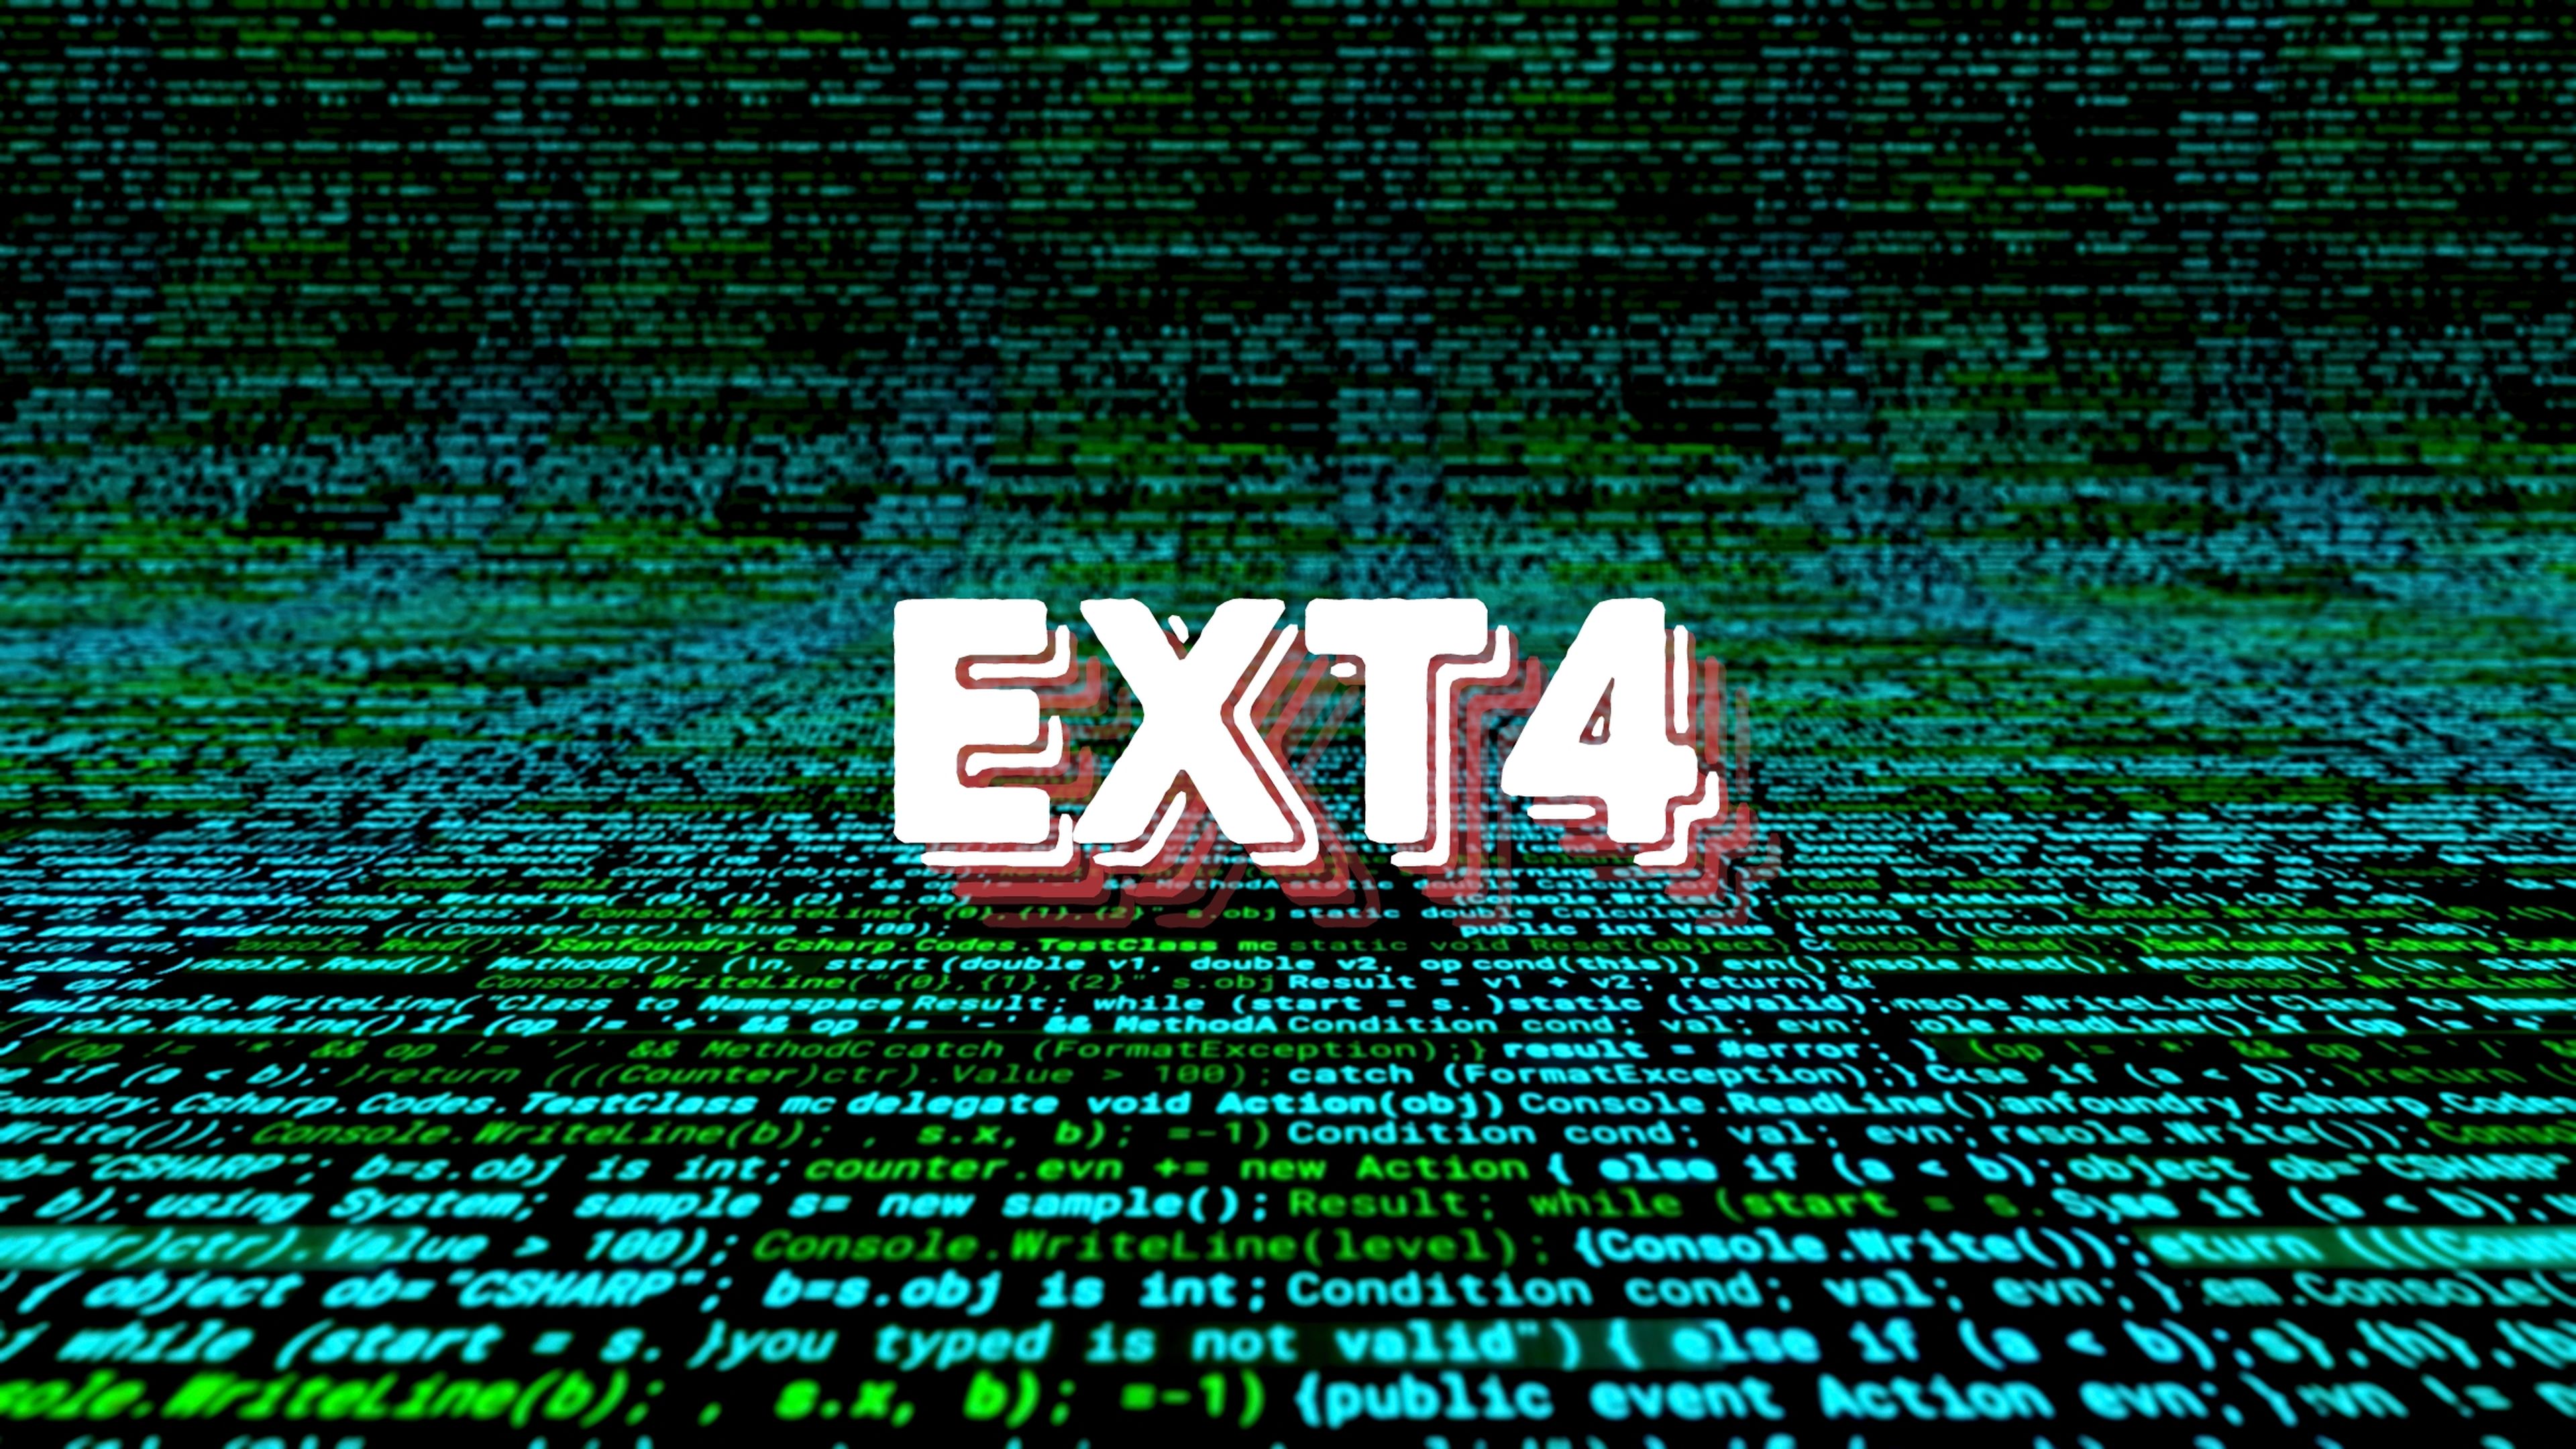 Ext4